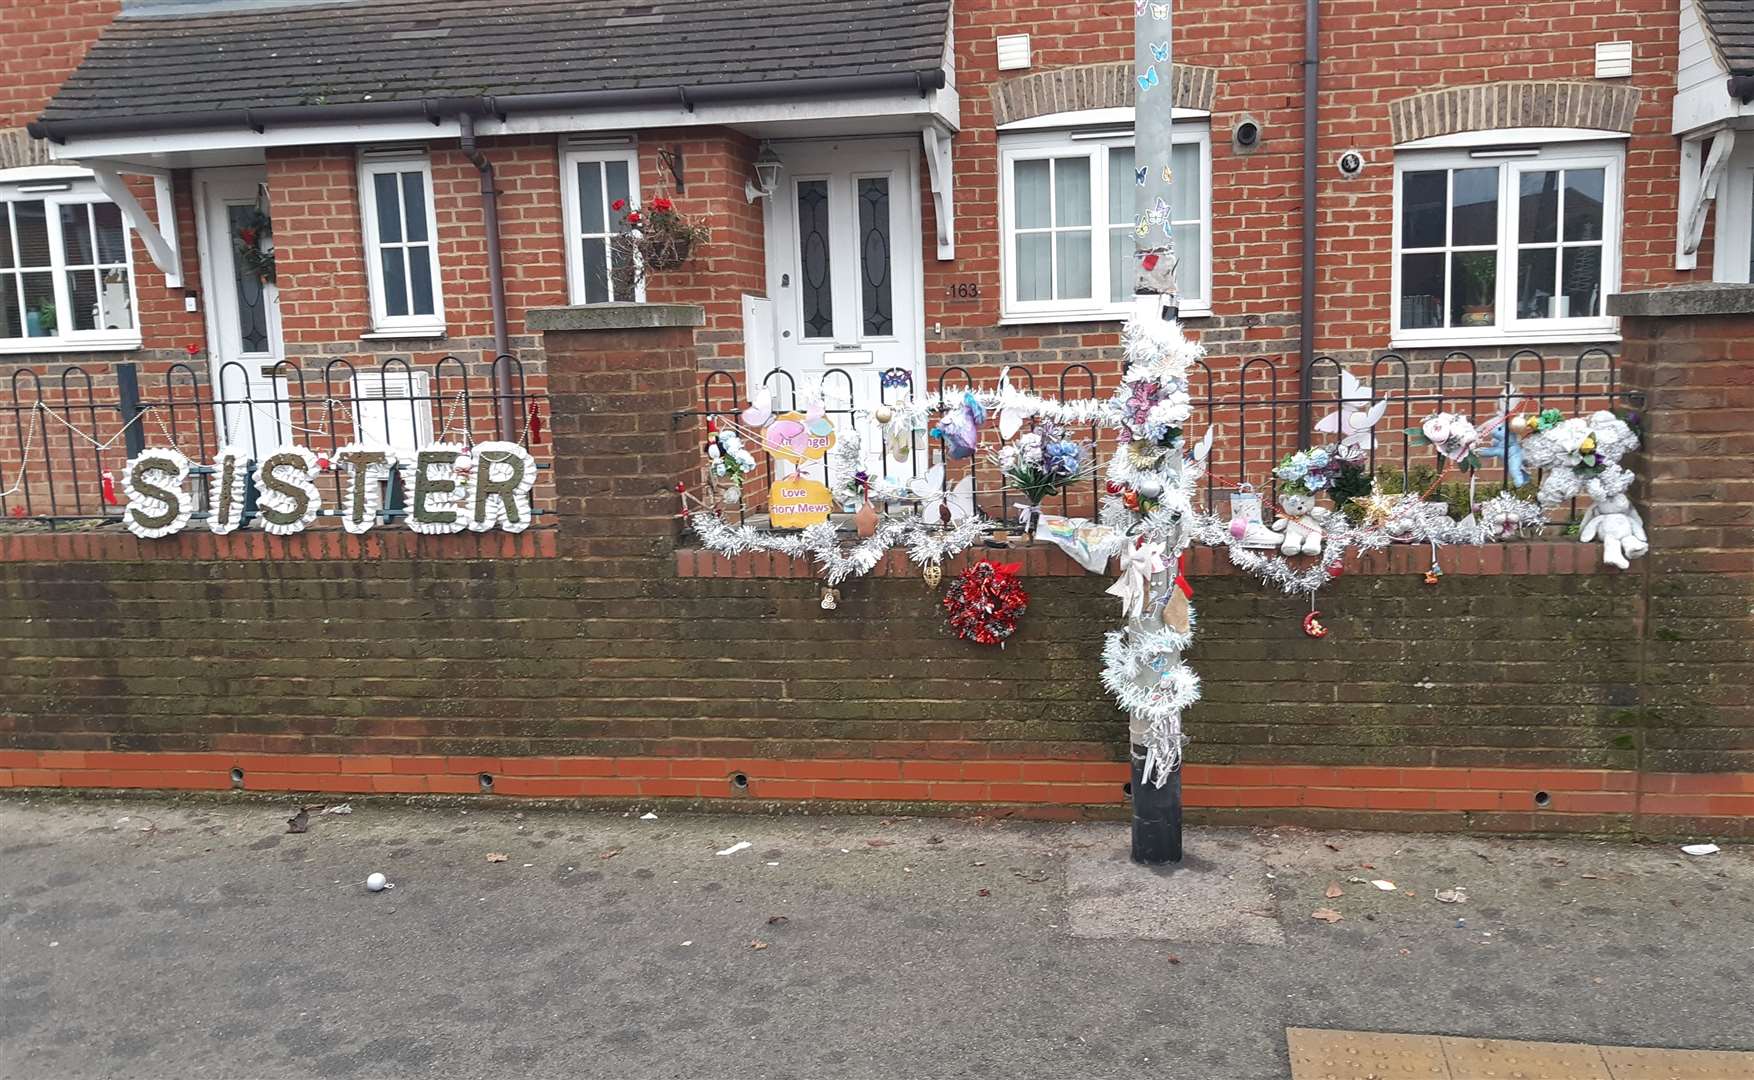 Christmas decorations have been put up on memory of Lily Lockwood. Photo: Sean Delaney (53929580)